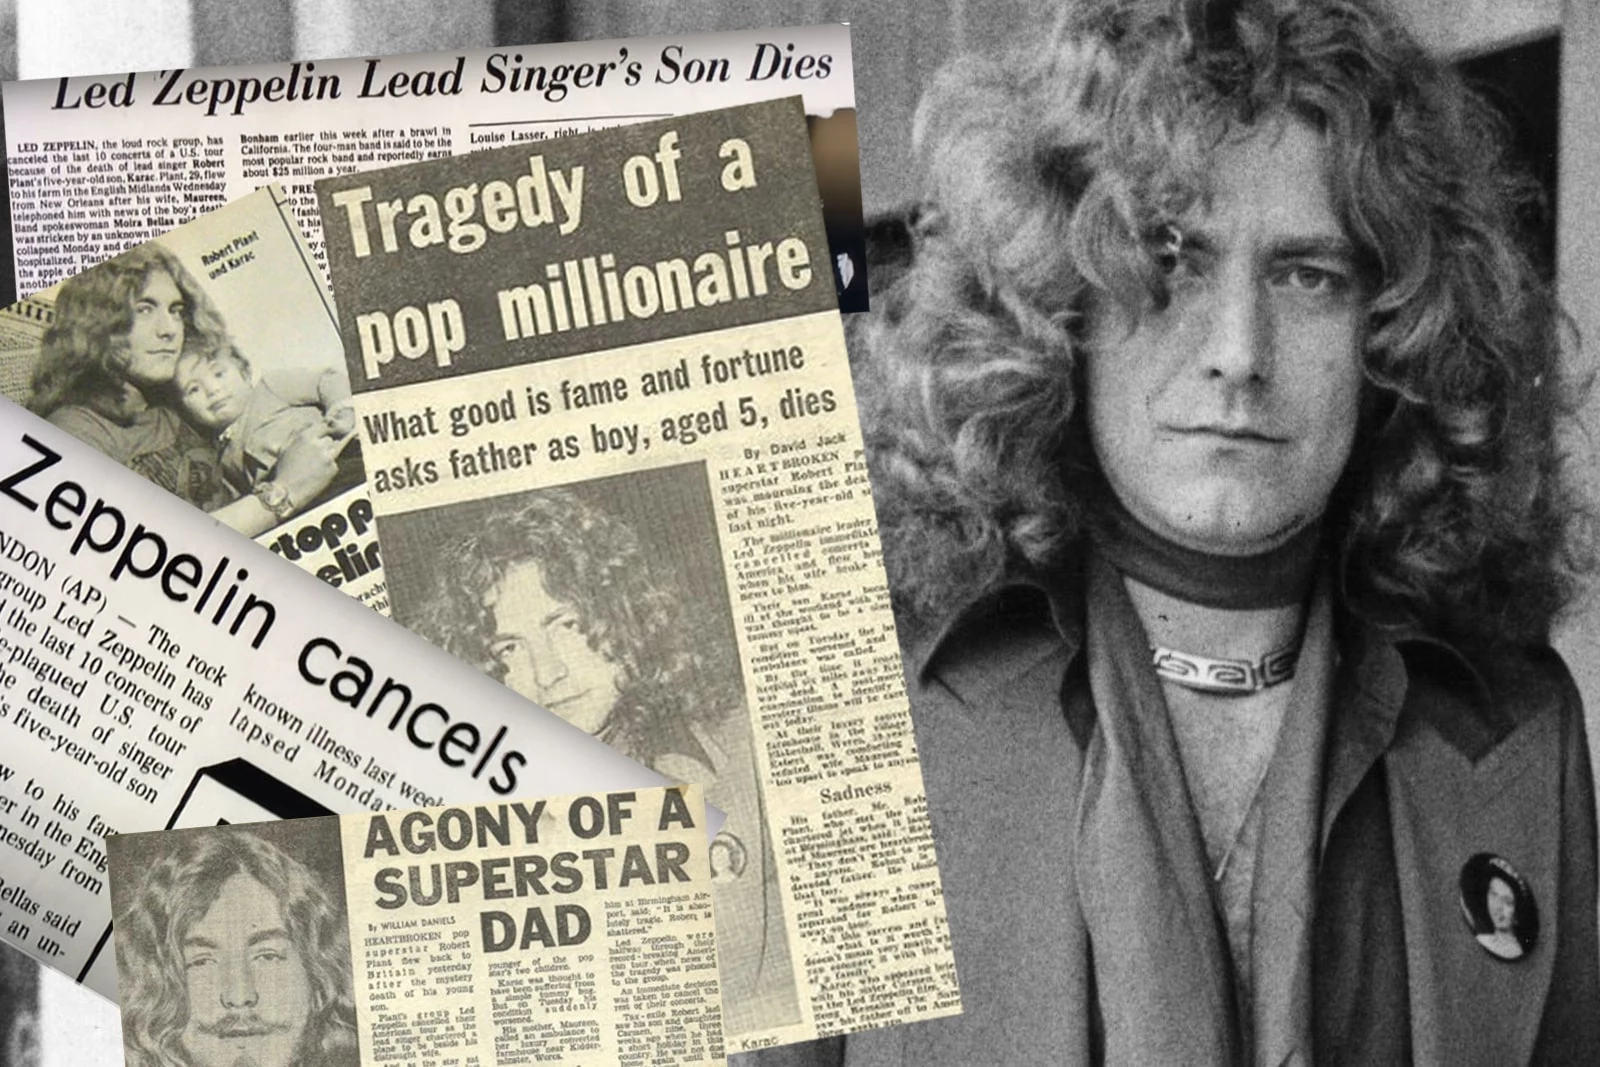 The Day a Tragic Loss Led Zeppelin Forever